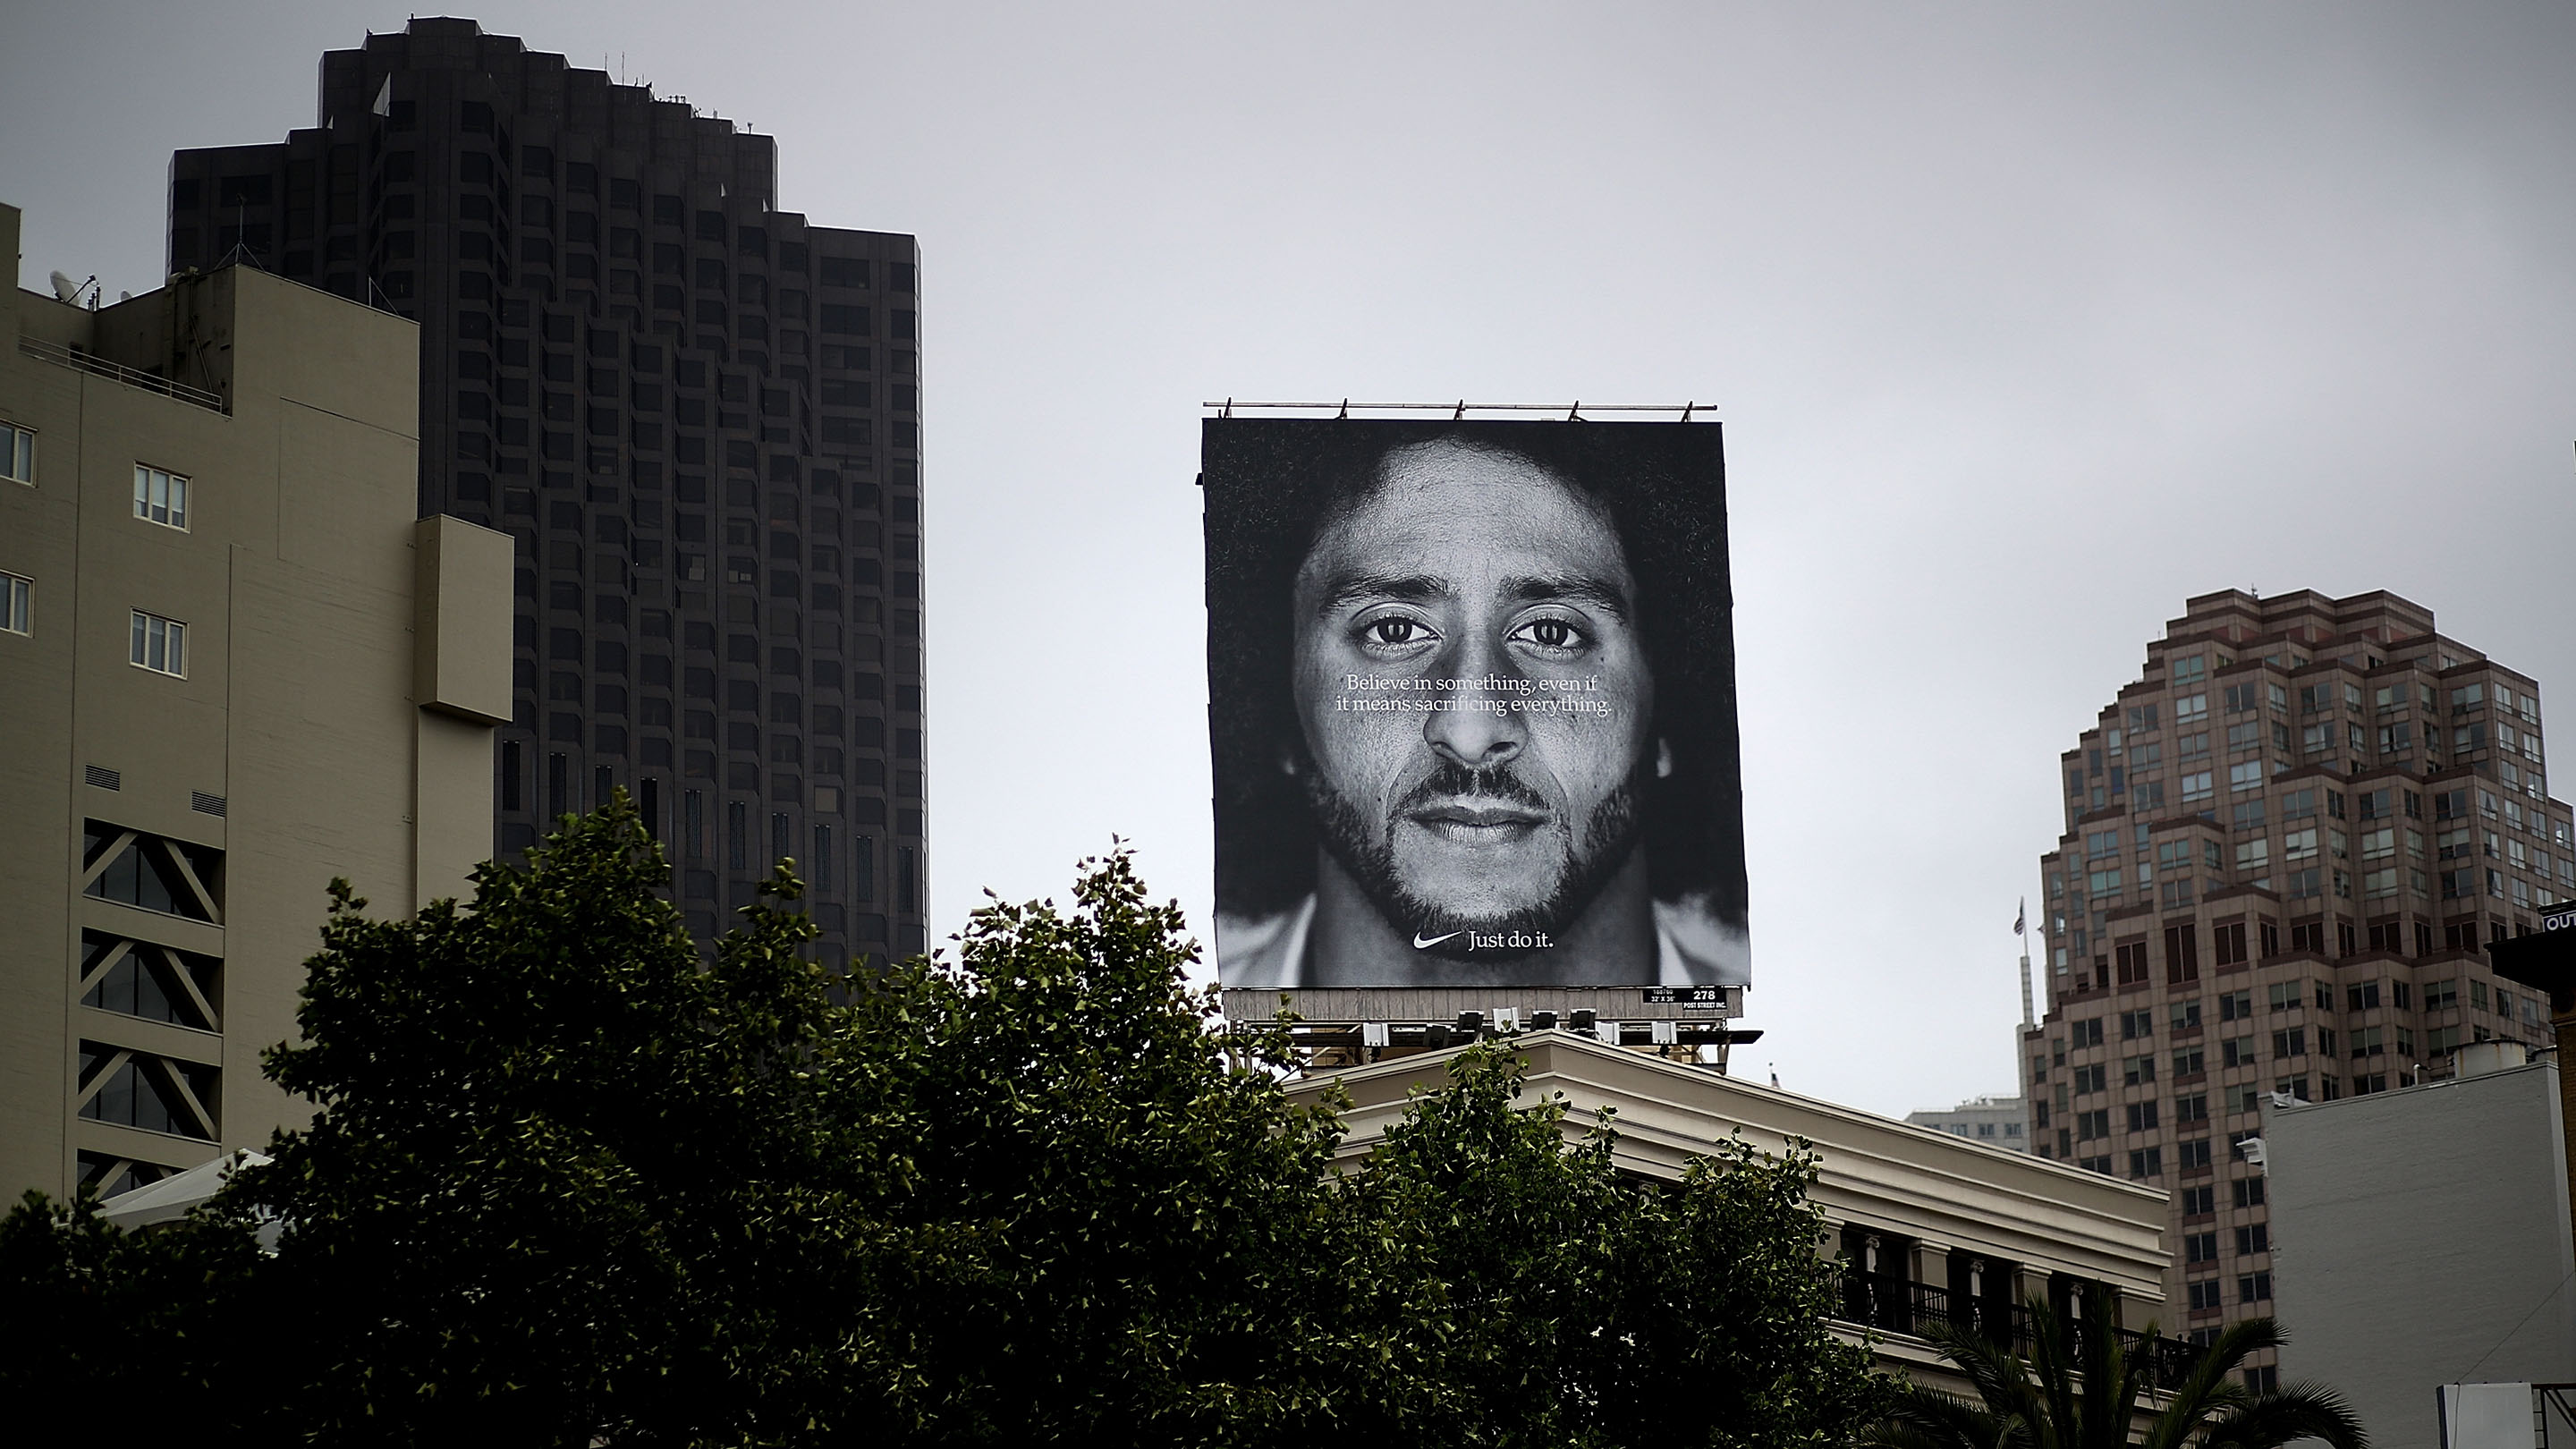 Popa Intervenir tranquilo Nike's brand burnished by its affiliation with Colin Kaepernick -  Marketplace